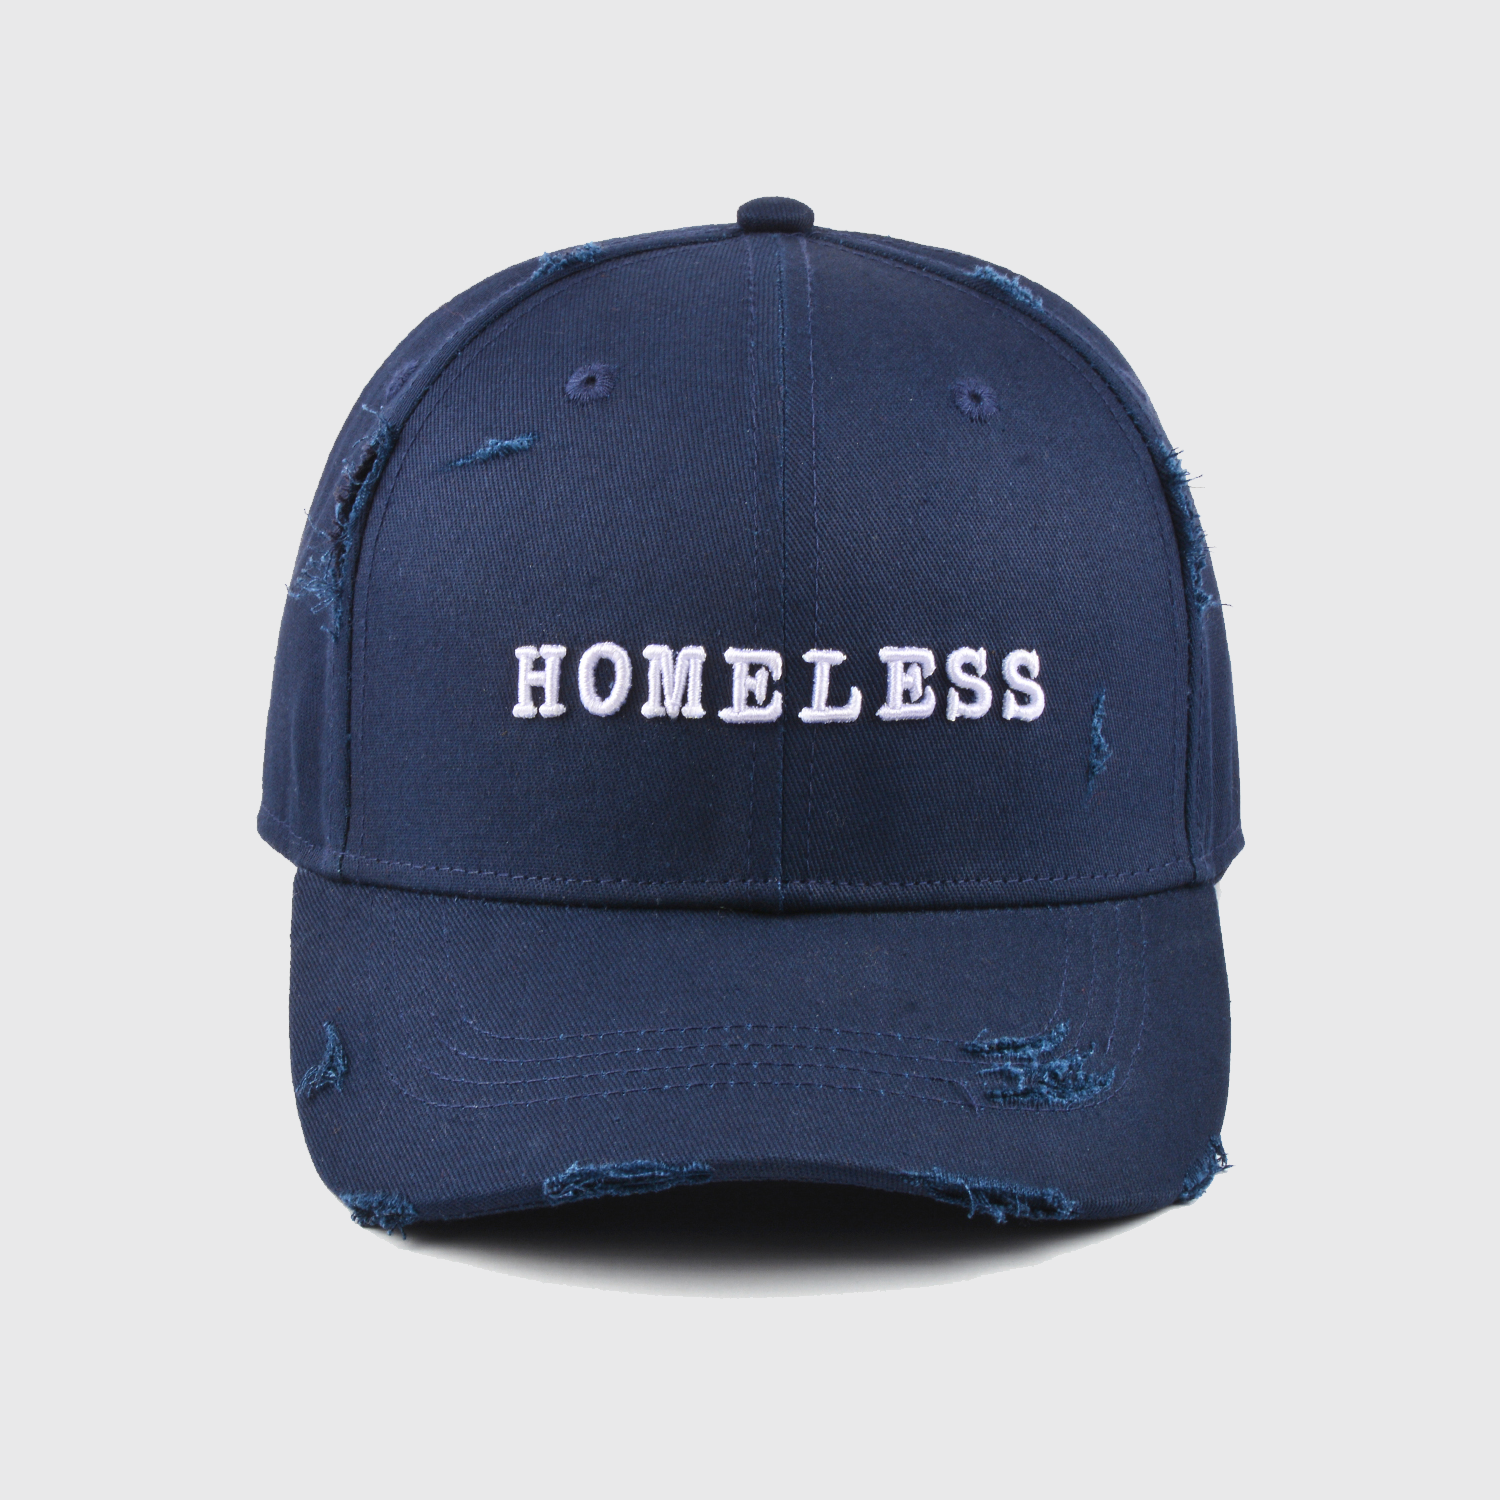 CAP NAVY BLUE - HOMELESS Official Site | with